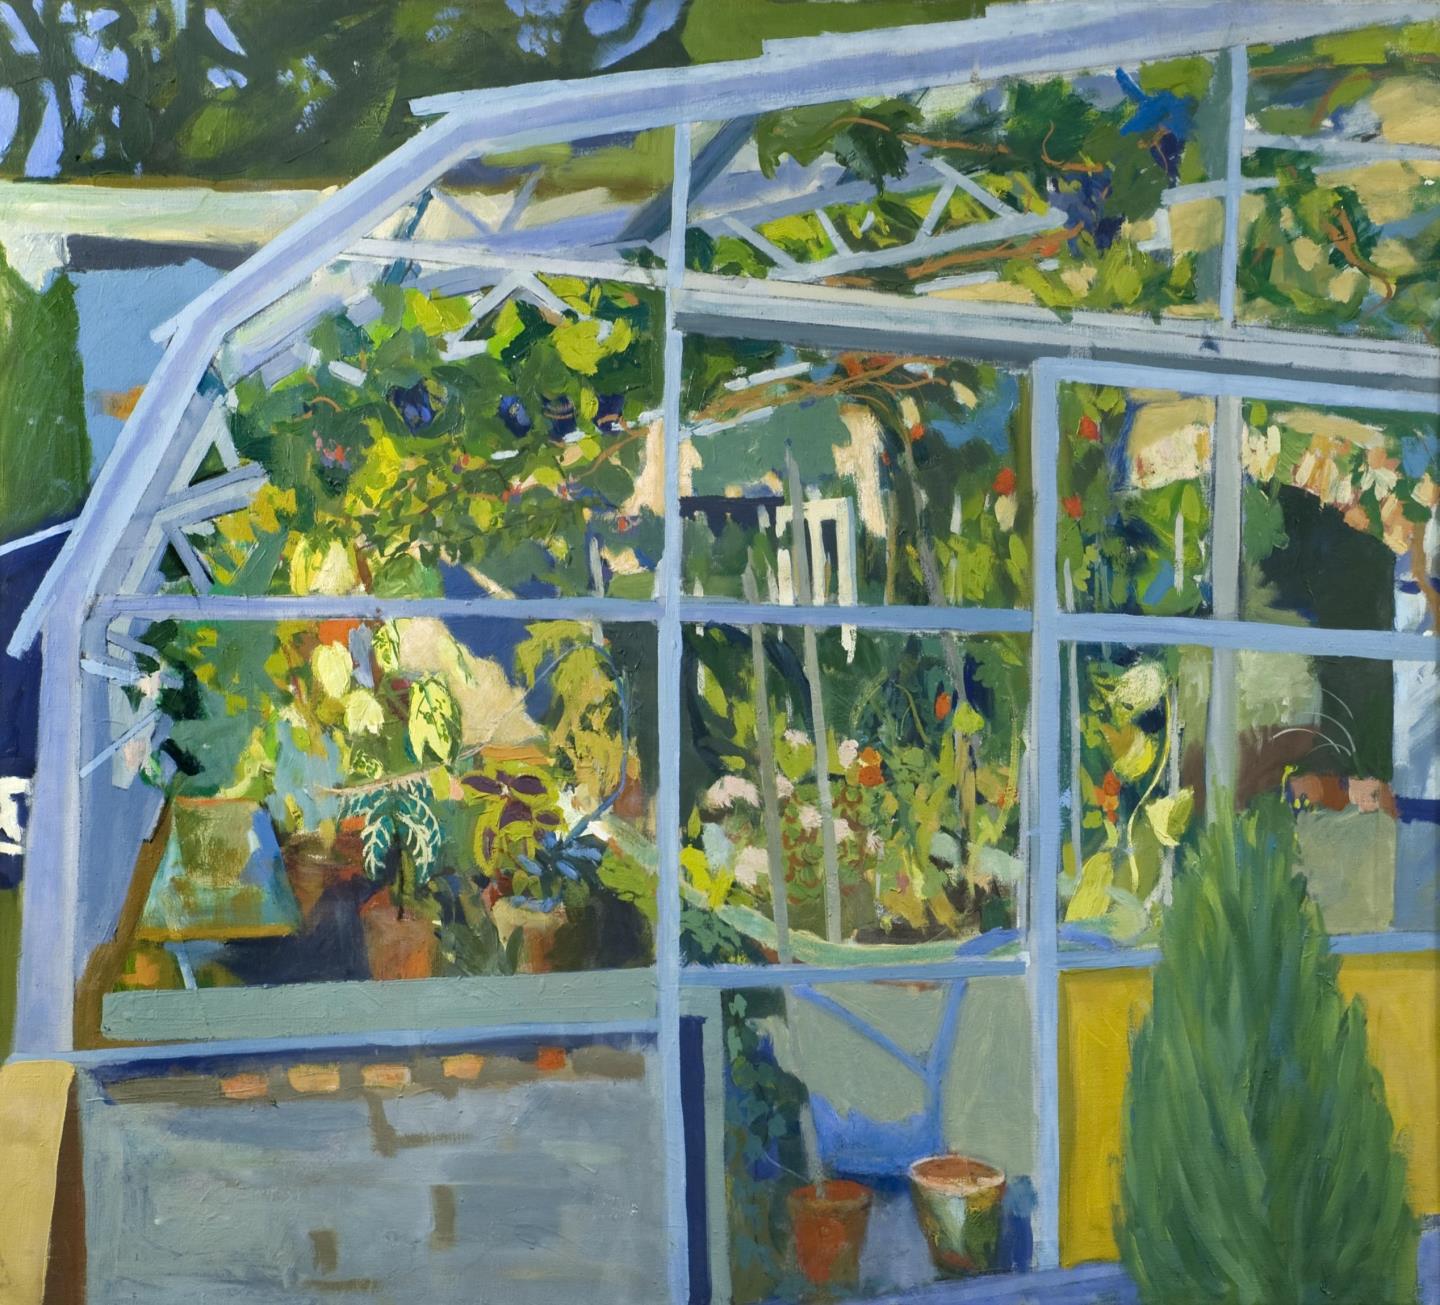 Janet painted Greenhouse when she was studying at the college in 1971.